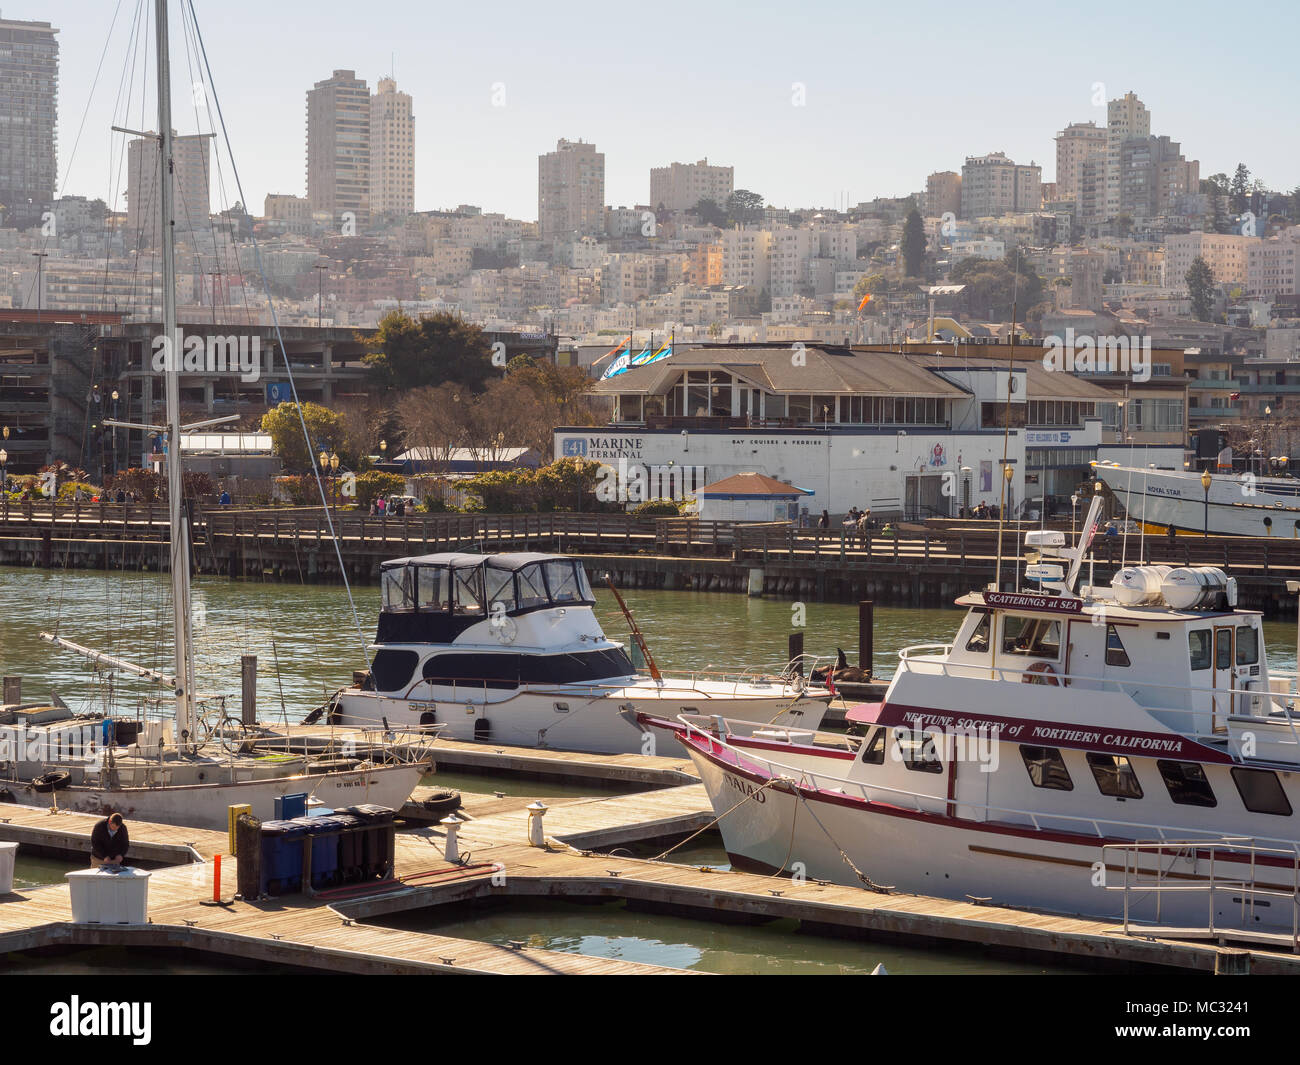 San Francisco, California - Feb 17, 2018 : Scenery of Pier 39 fisherman's wharf at San Francisco, which is a famous tourist spot. Stock Photo